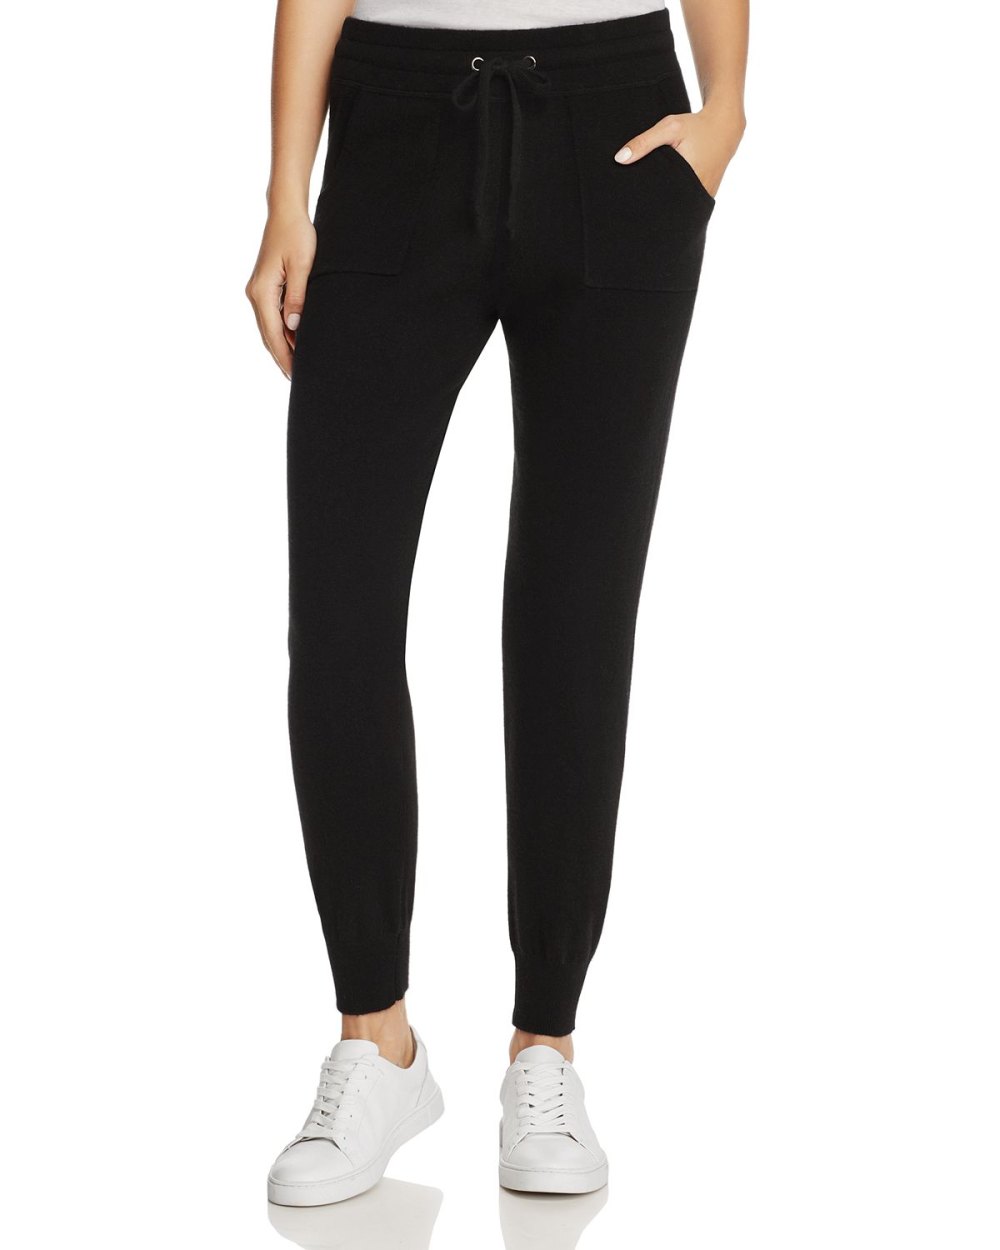 black cashmere jogger pants bloomingdales friends and family sale